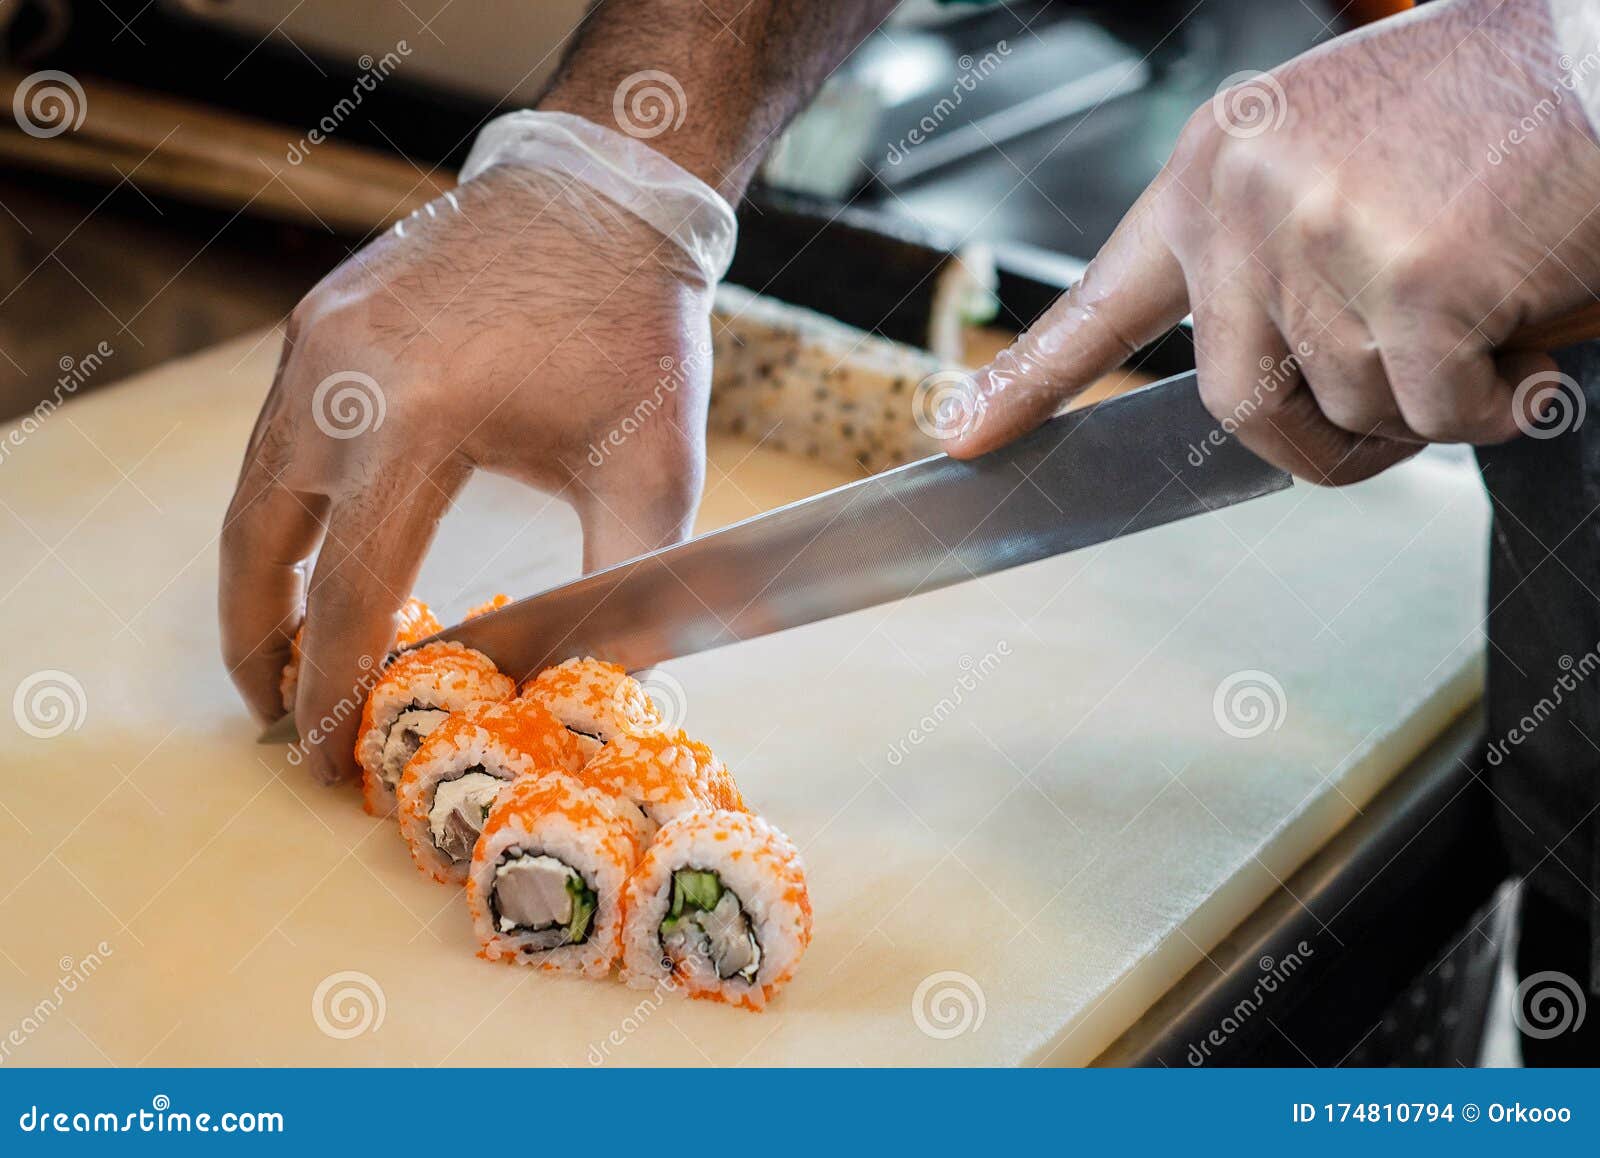 Sushi Kitchen Sushu Being Made And Cut Stock Photo Image Of Closeup Knife 174810794